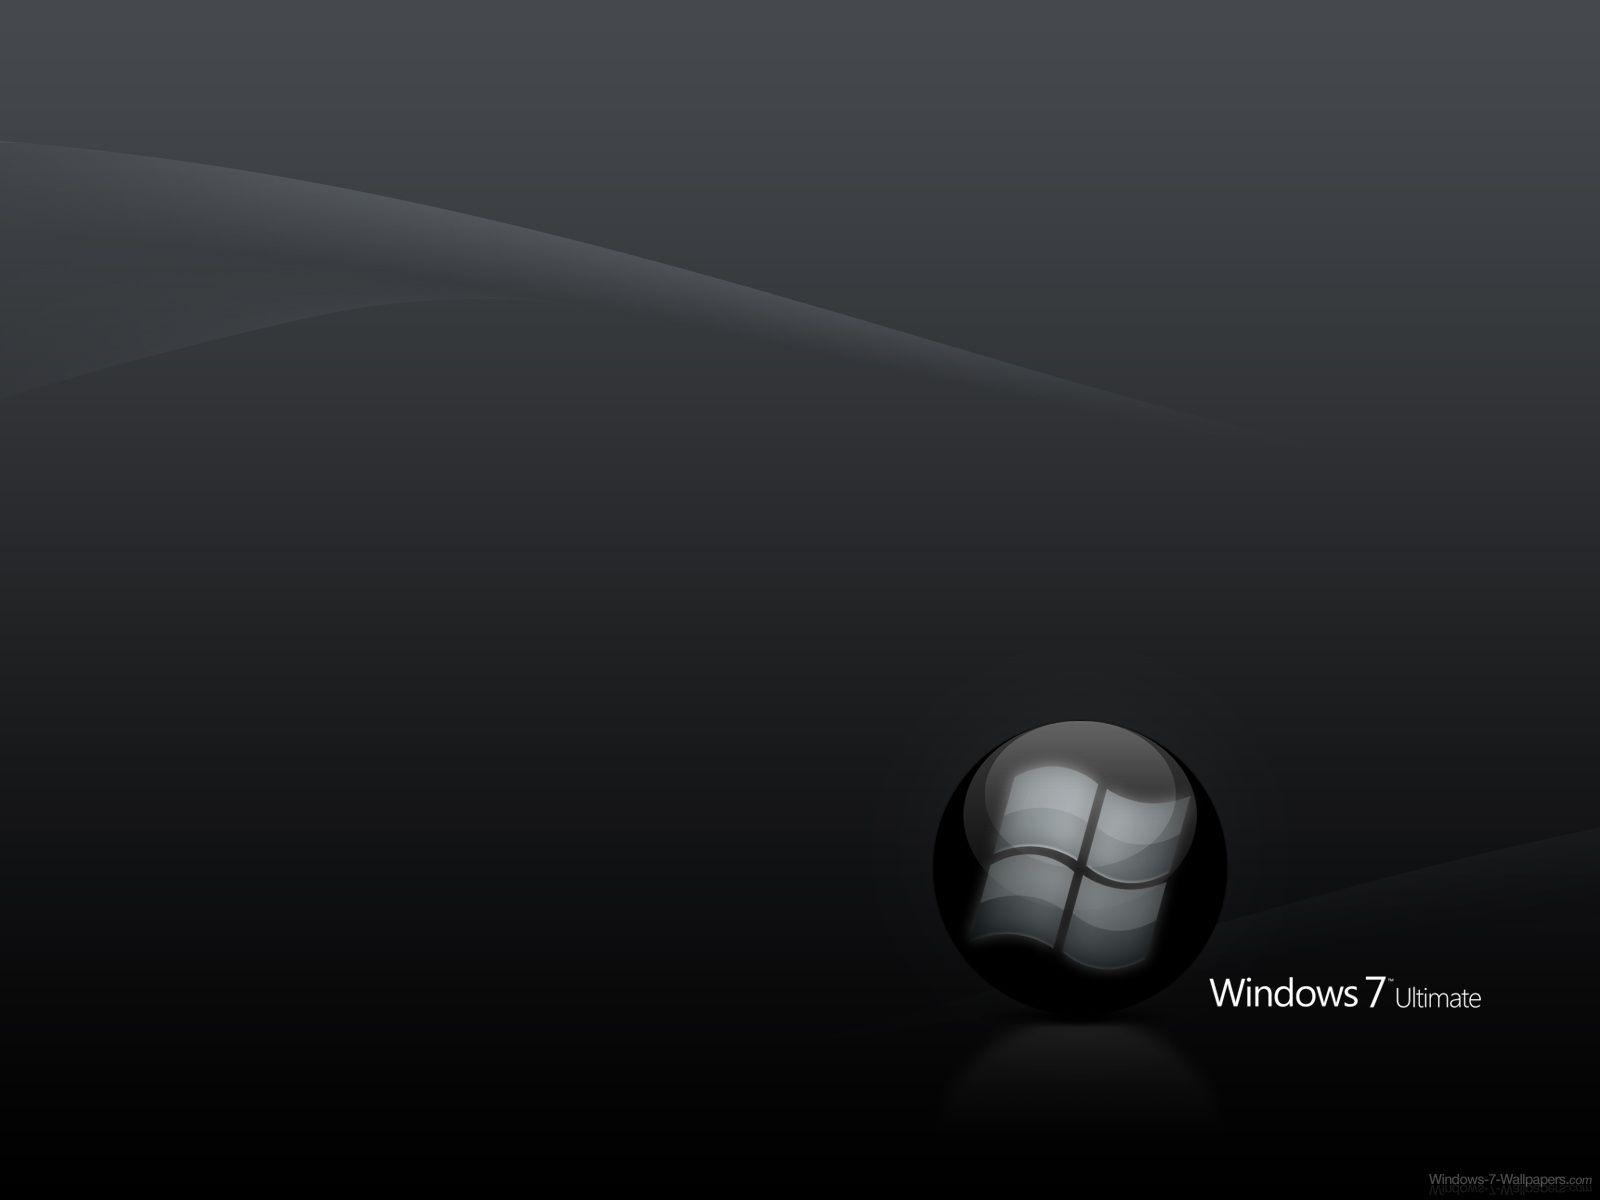 Image For > Windows 7 Ultimate Wallpapers Hd